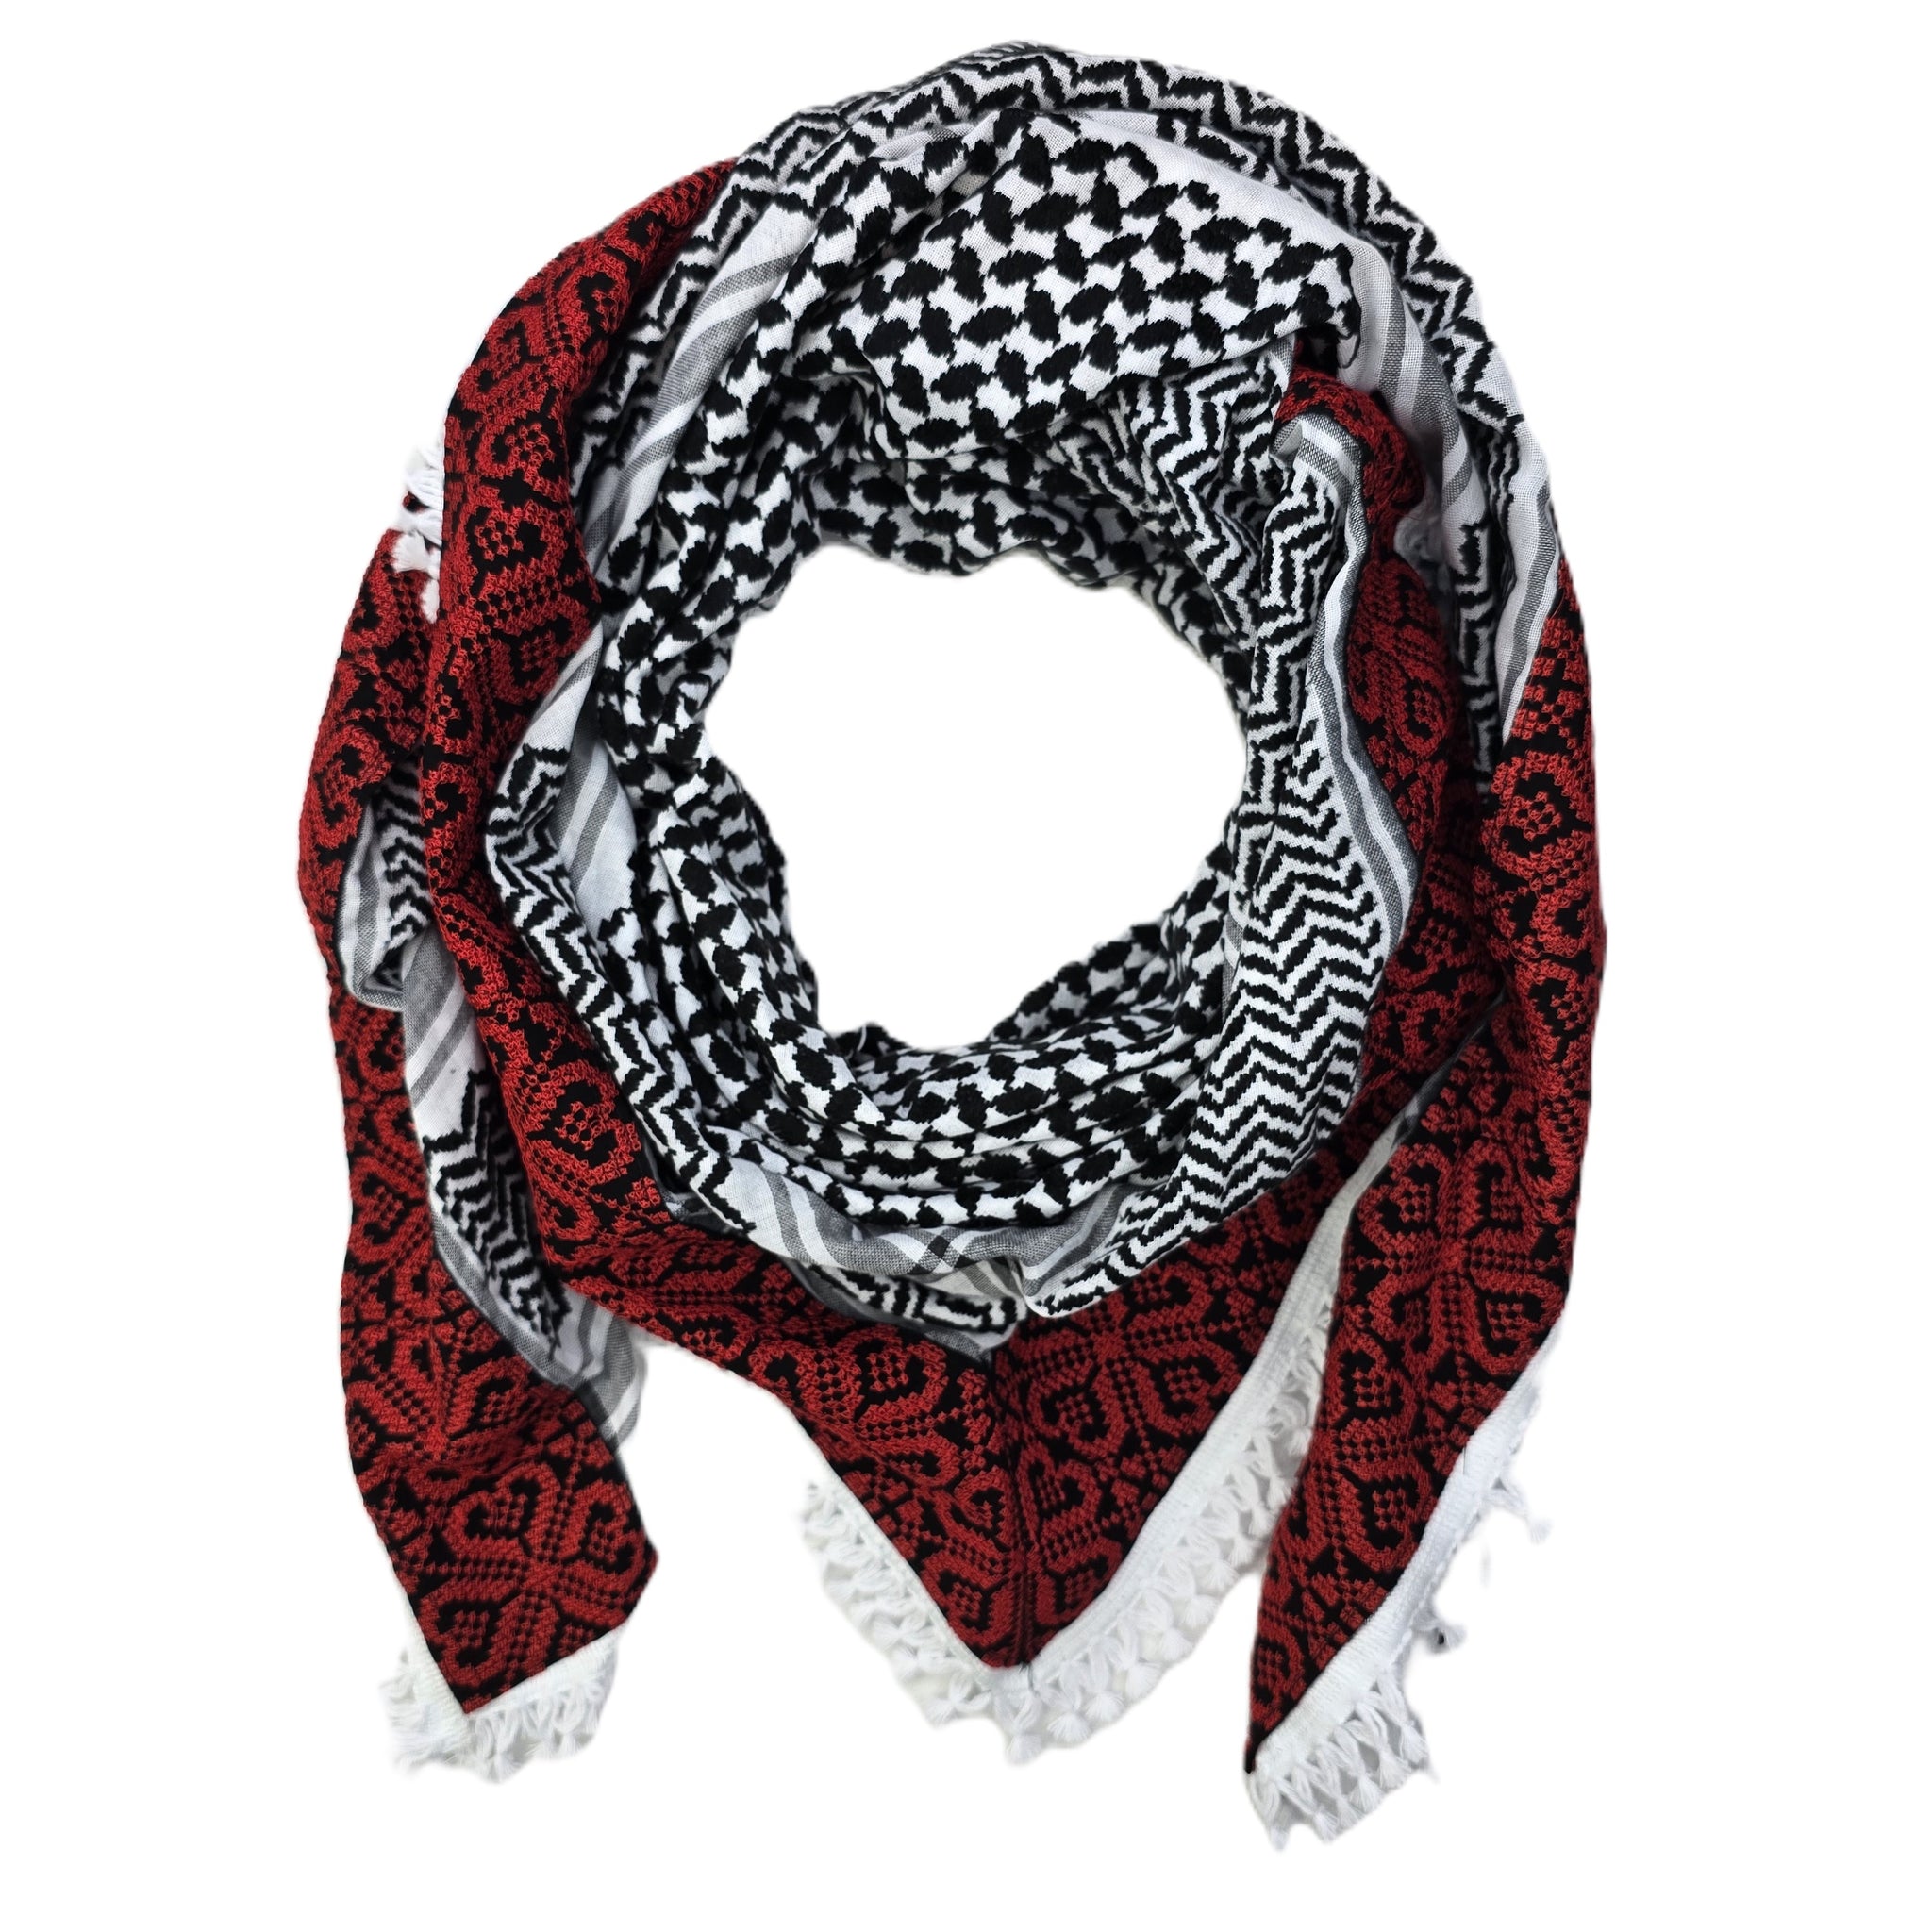 red black and white embroidered keffiyeh